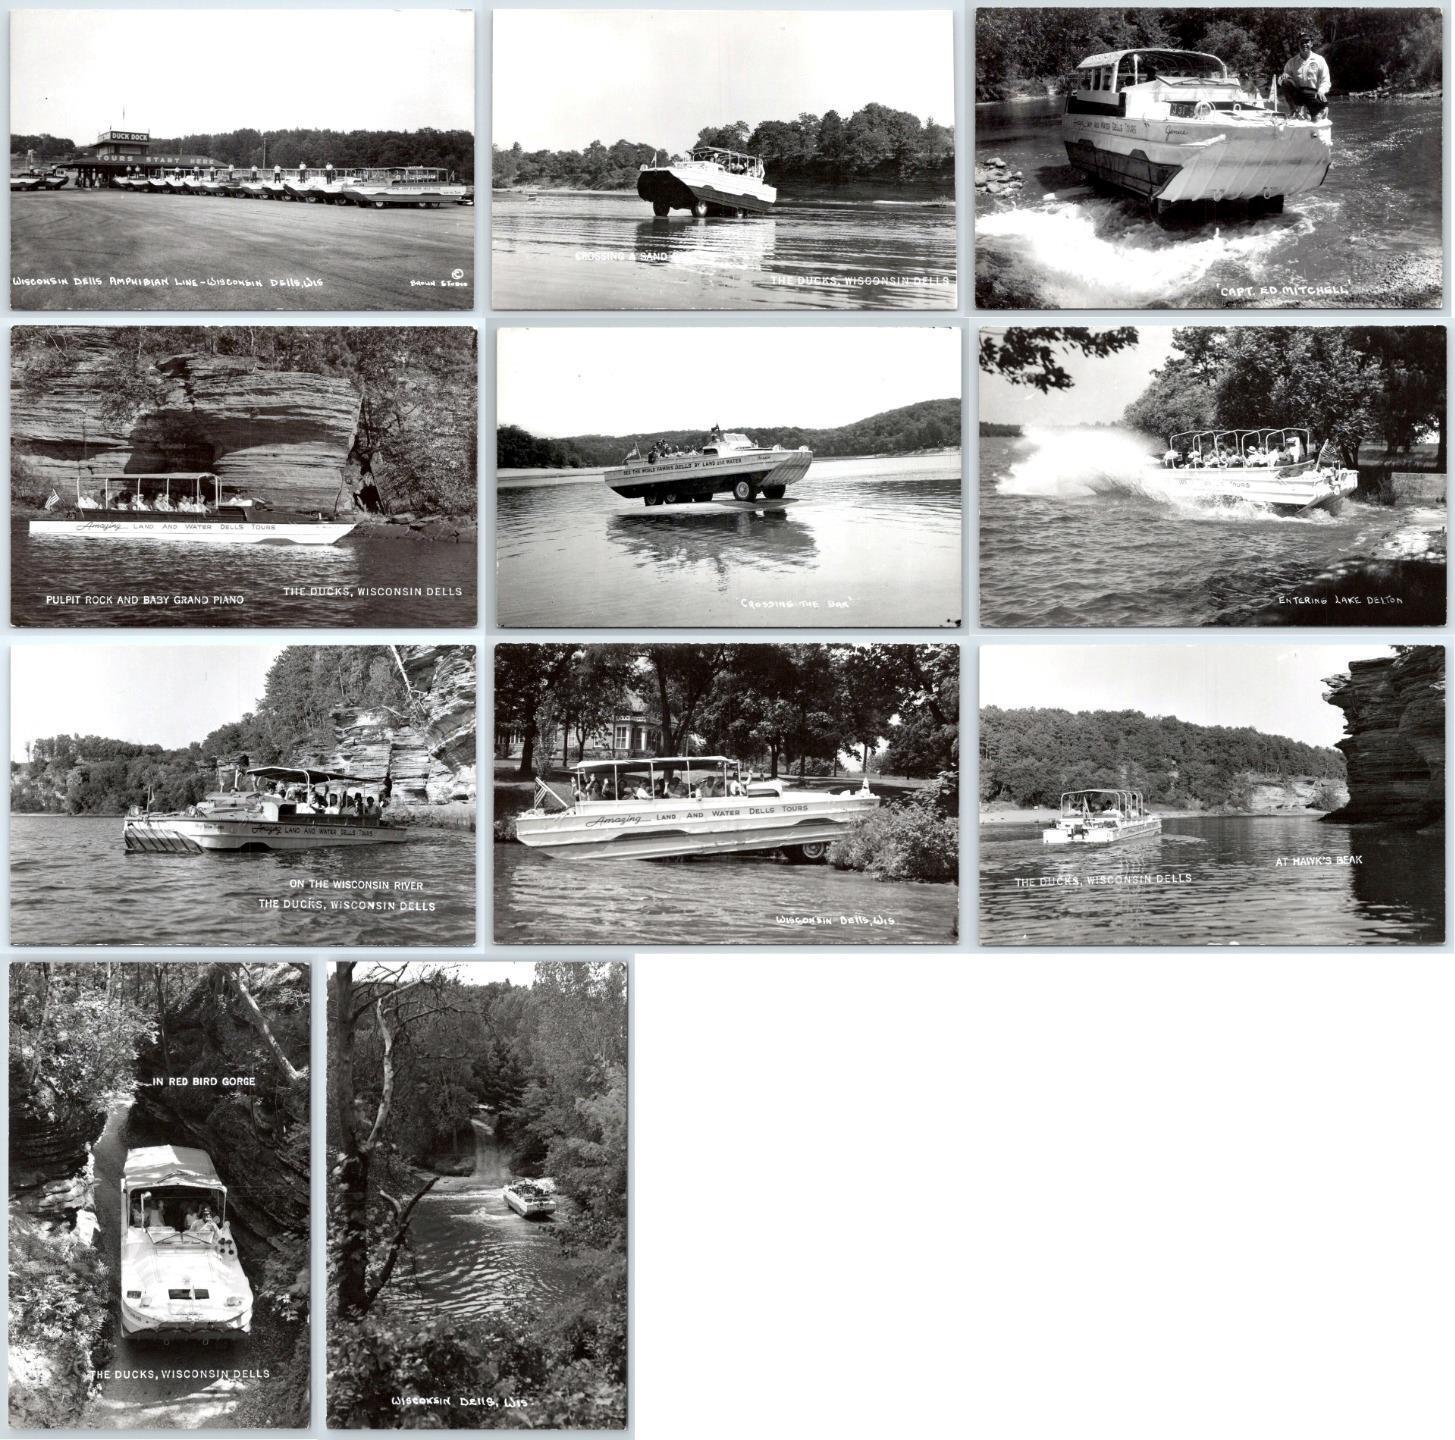 RPPC LOT OF 11 WISCONSIN DELLS POSTCARDS DUCK BOATS CAPT ED MITCHELL SCENIC TOUR